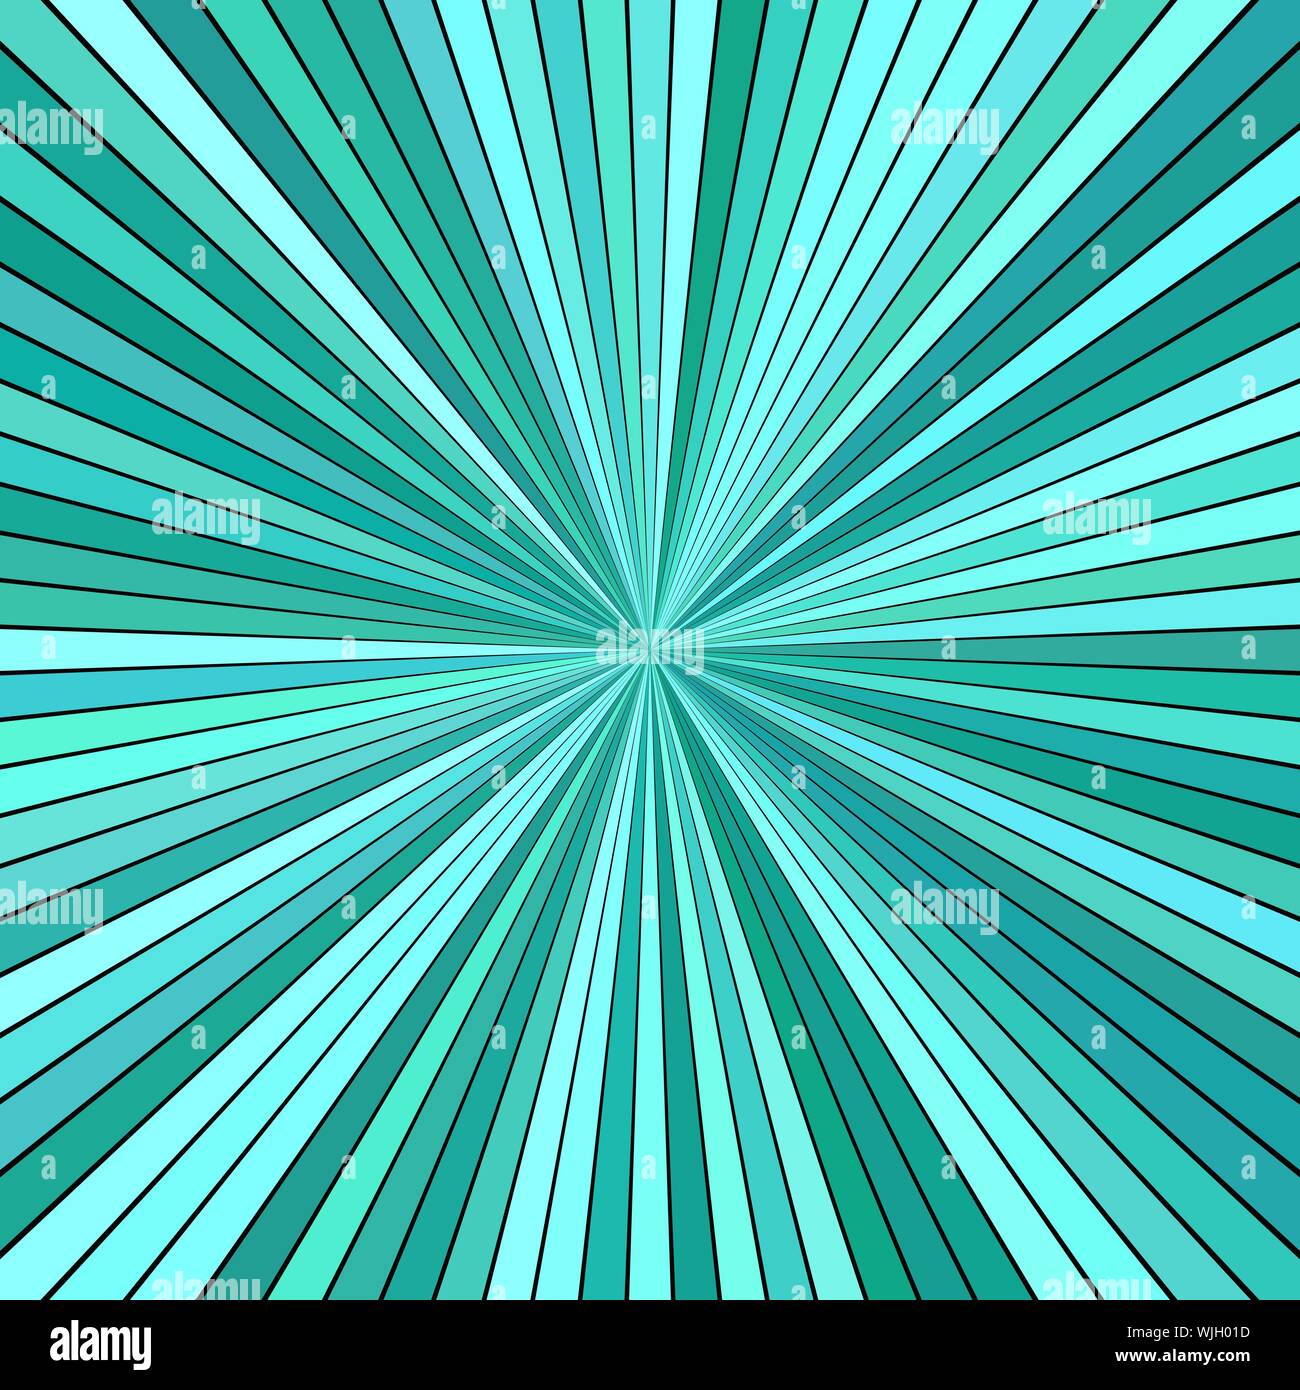 Turquoise hypnotic abstract striped star burst background design - vector explosion illustration Stock Vector